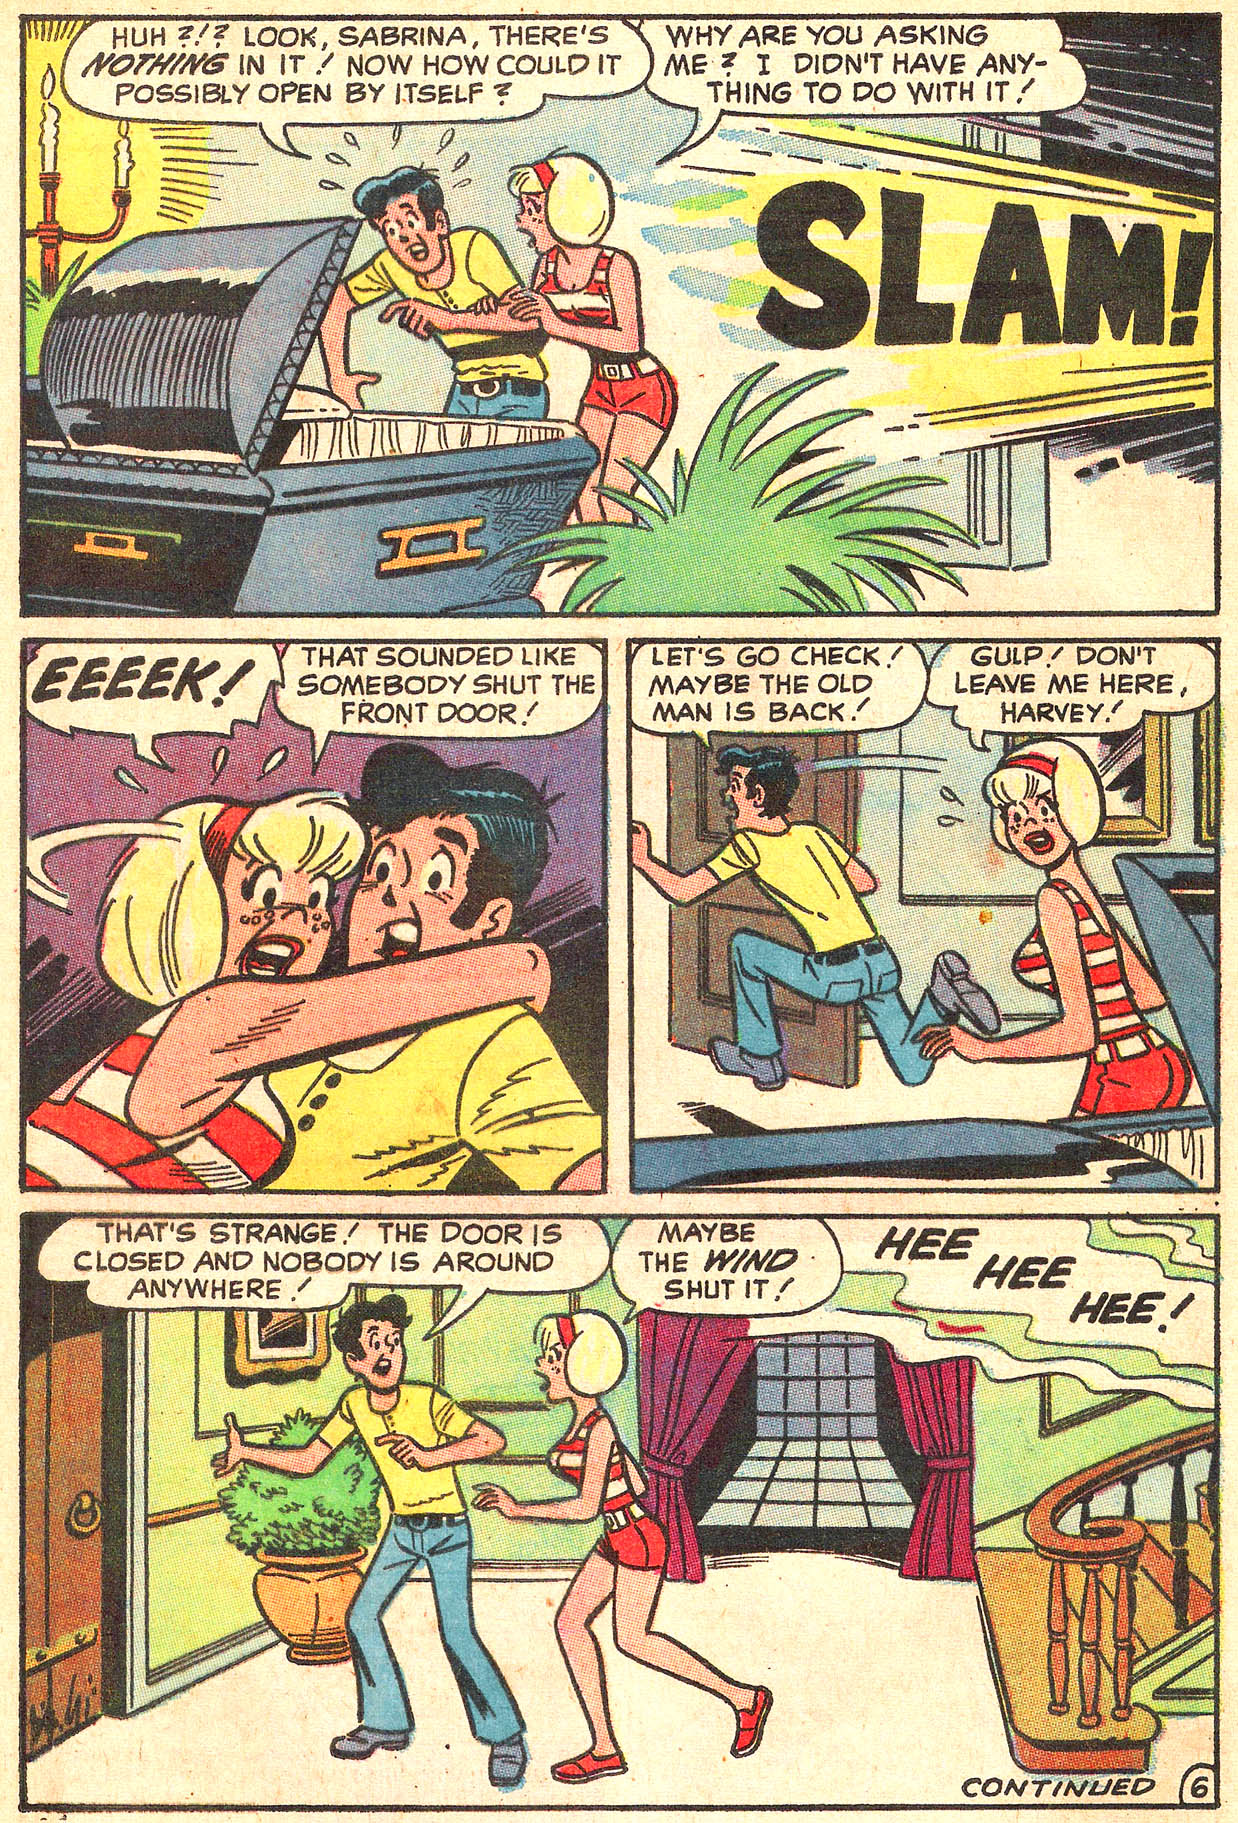 Sabrina The Teenage Witch (1971) Issue #3 #3 - English 8